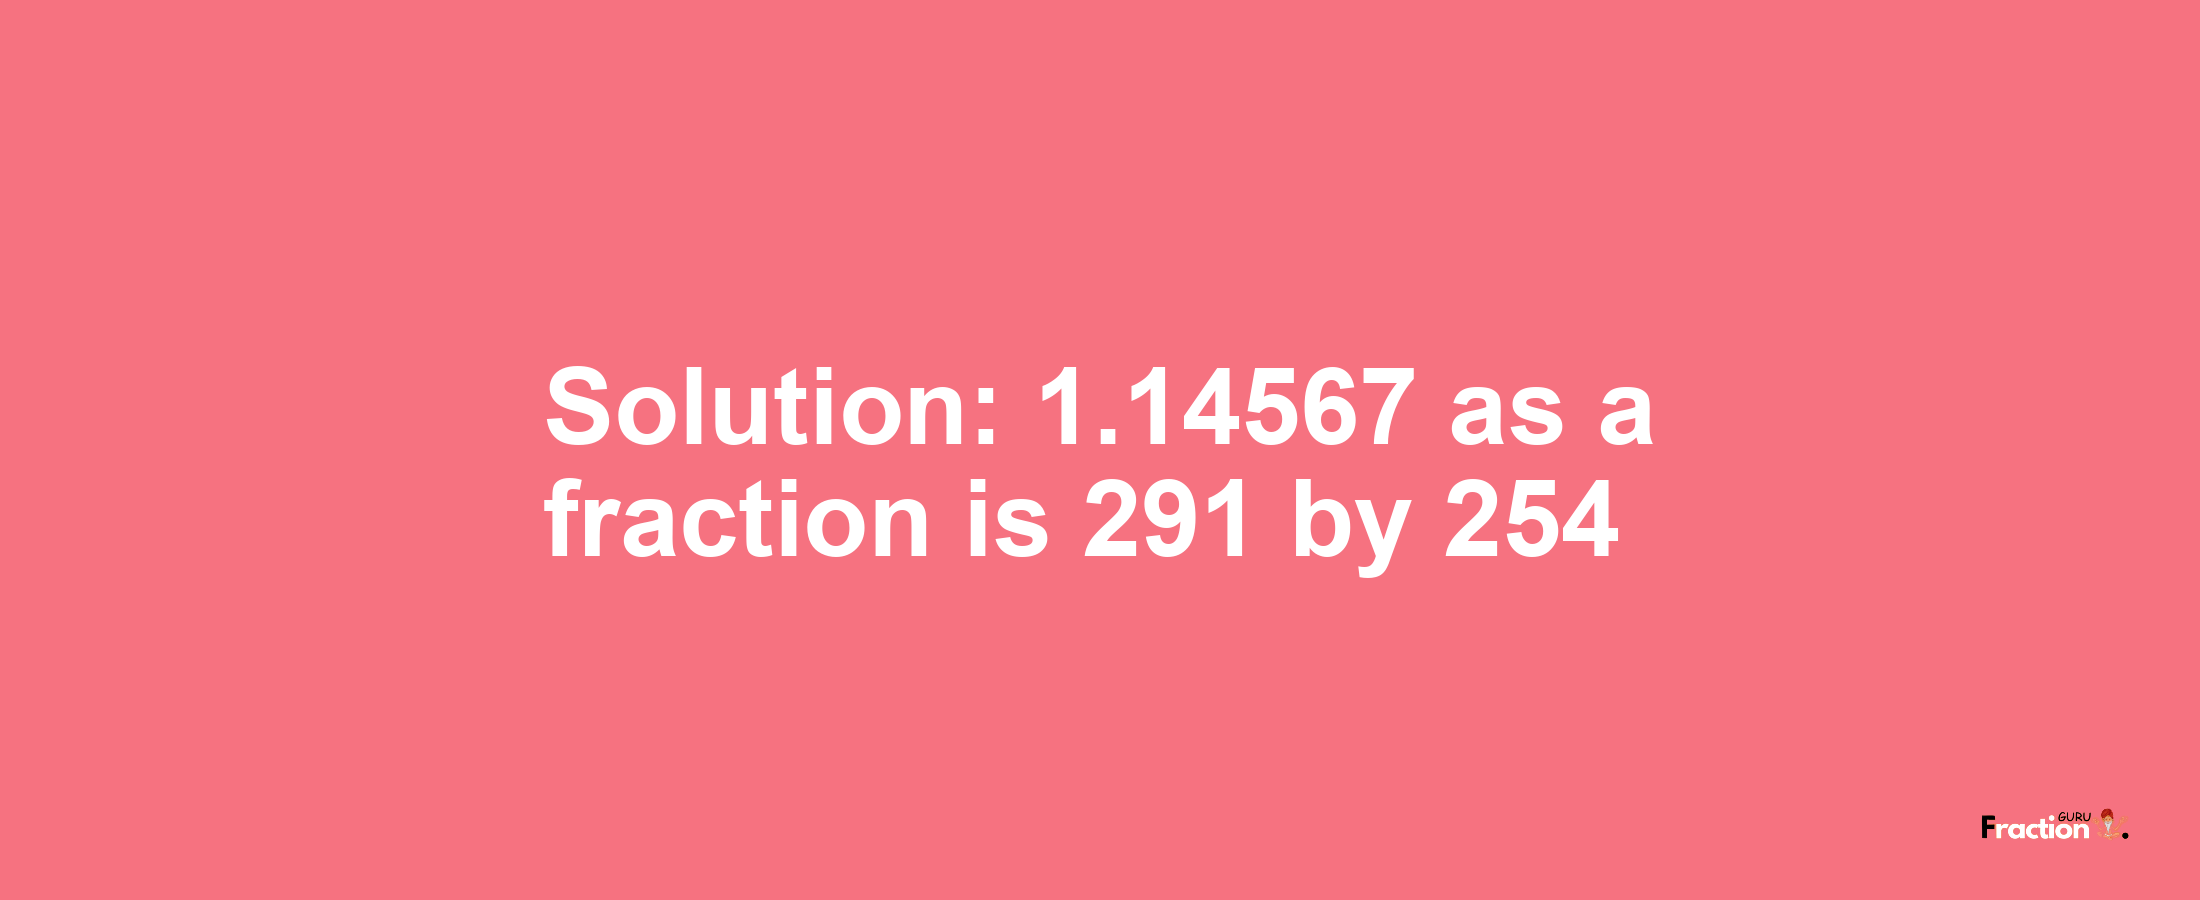 Solution:1.14567 as a fraction is 291/254